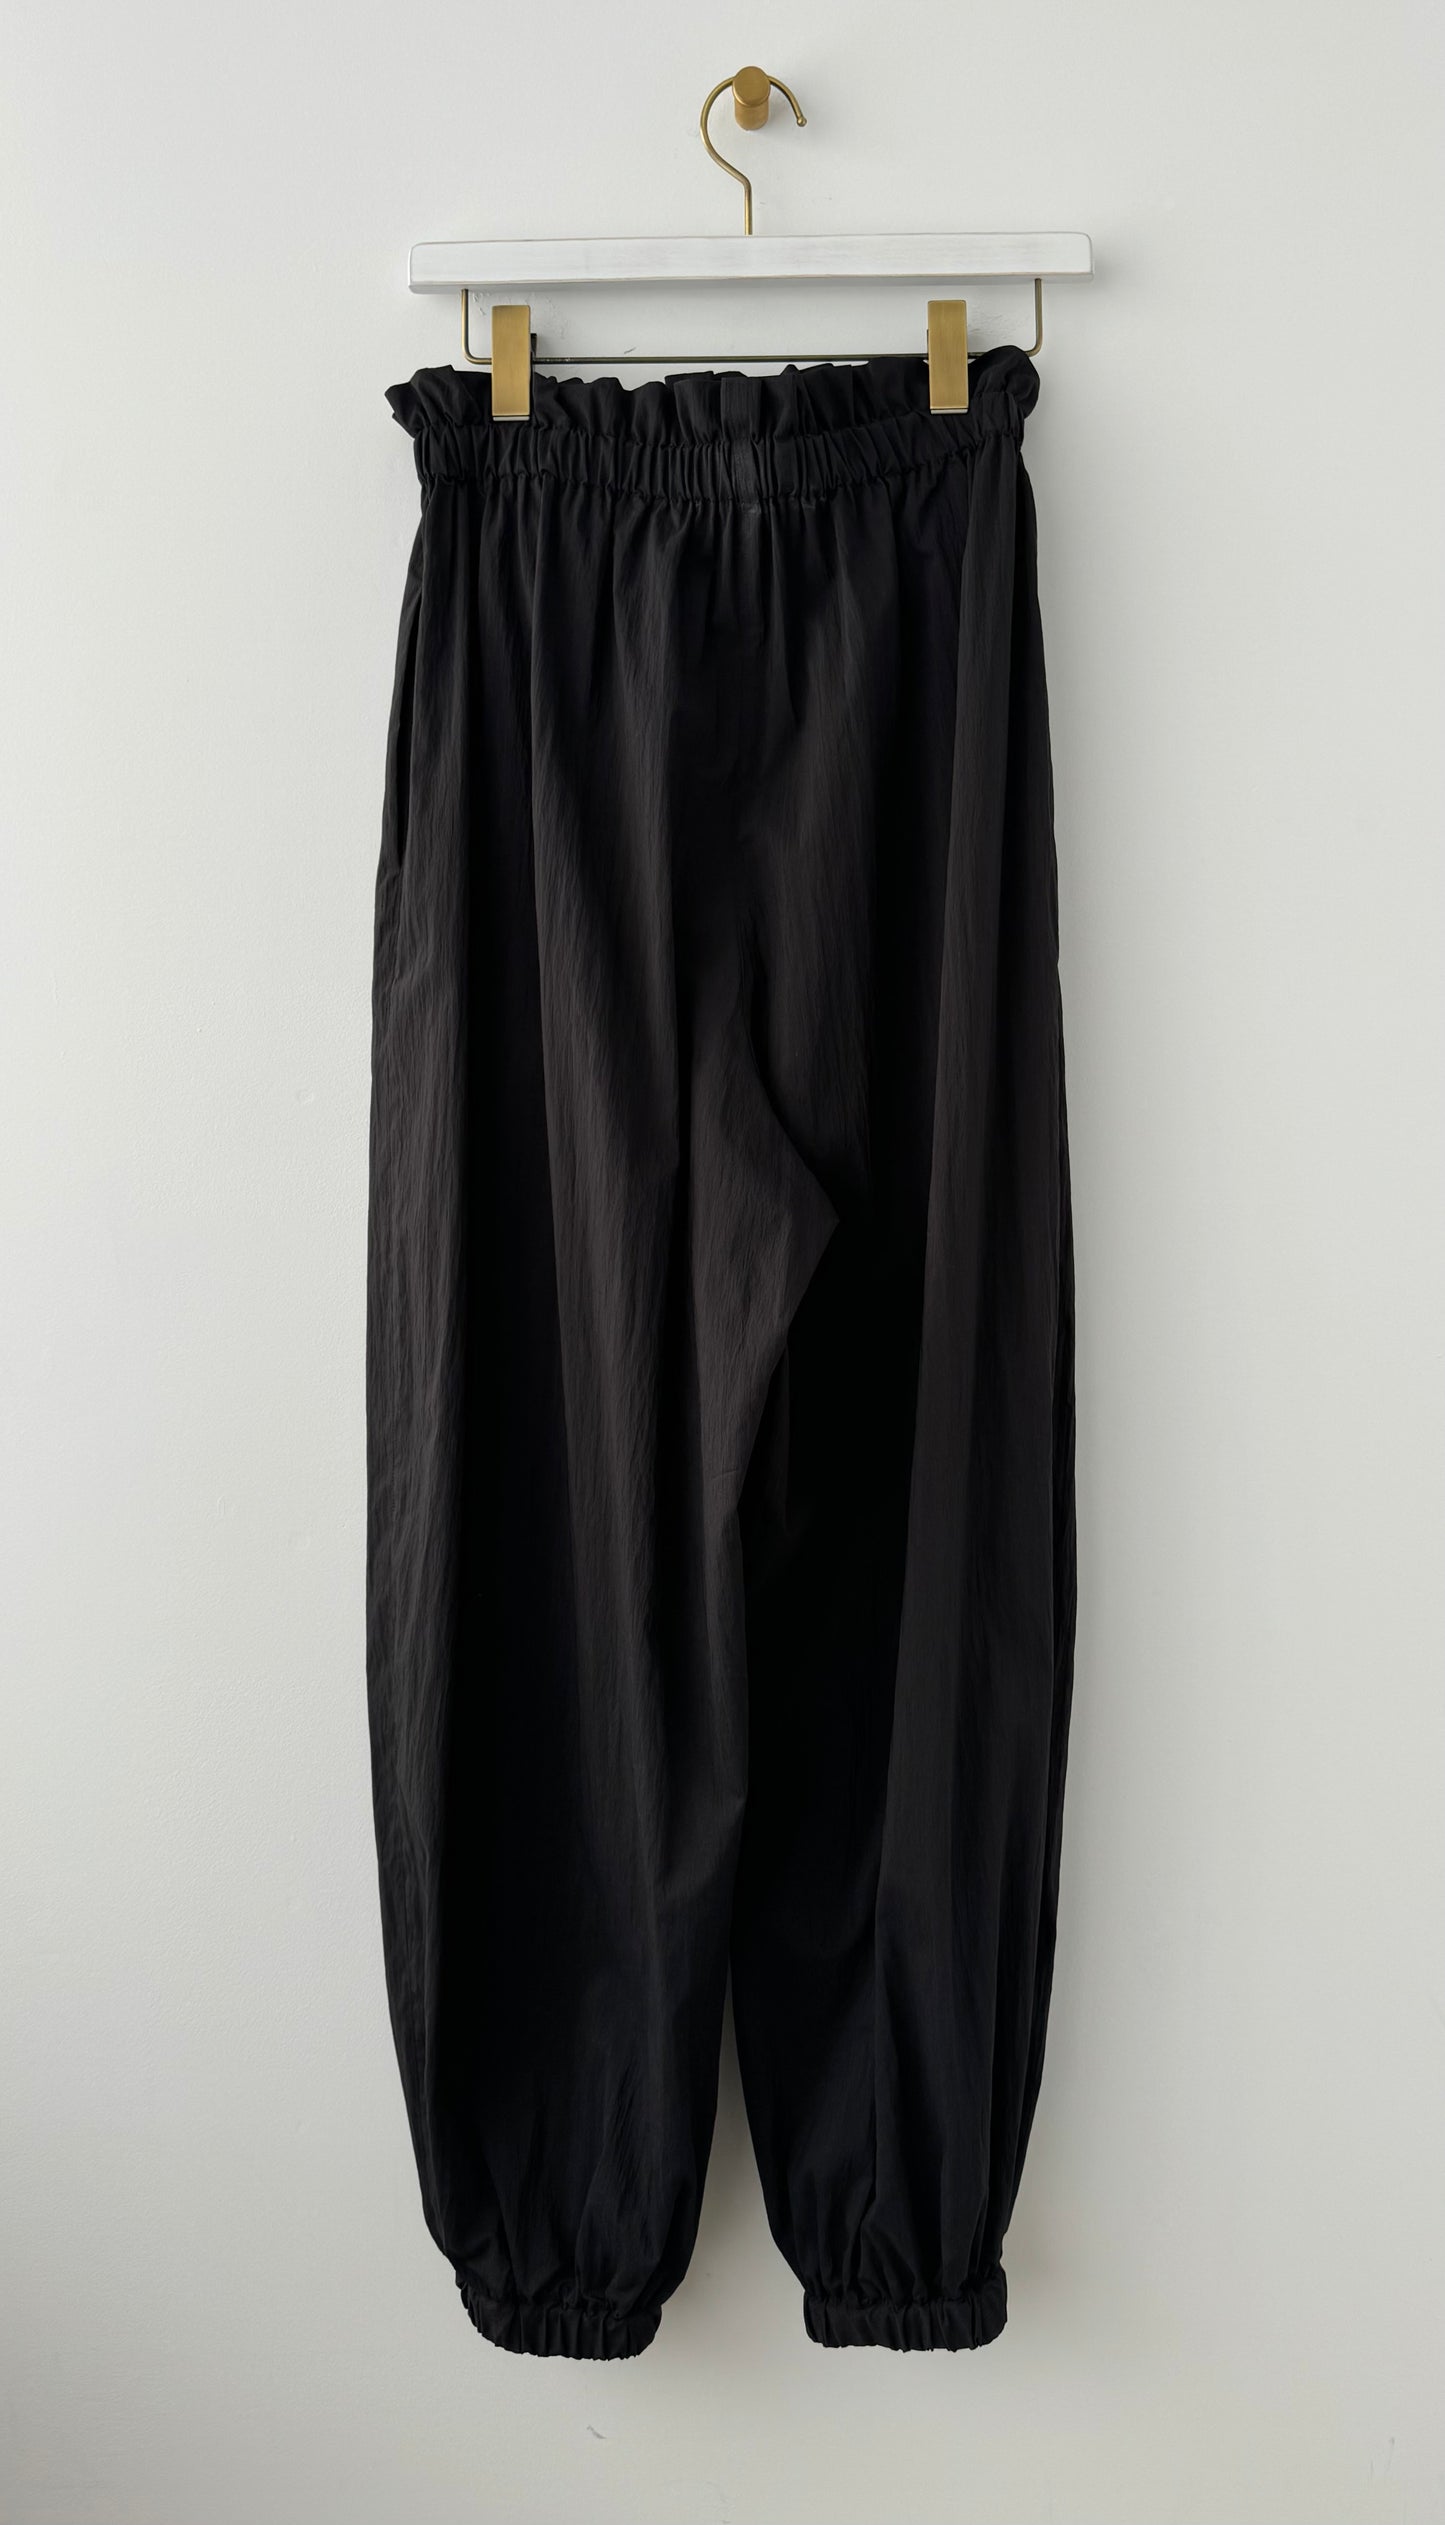 New attachment pants (BLACK) TENNE HANDCRAFTED MODERN　パンツ　通販　取扱店